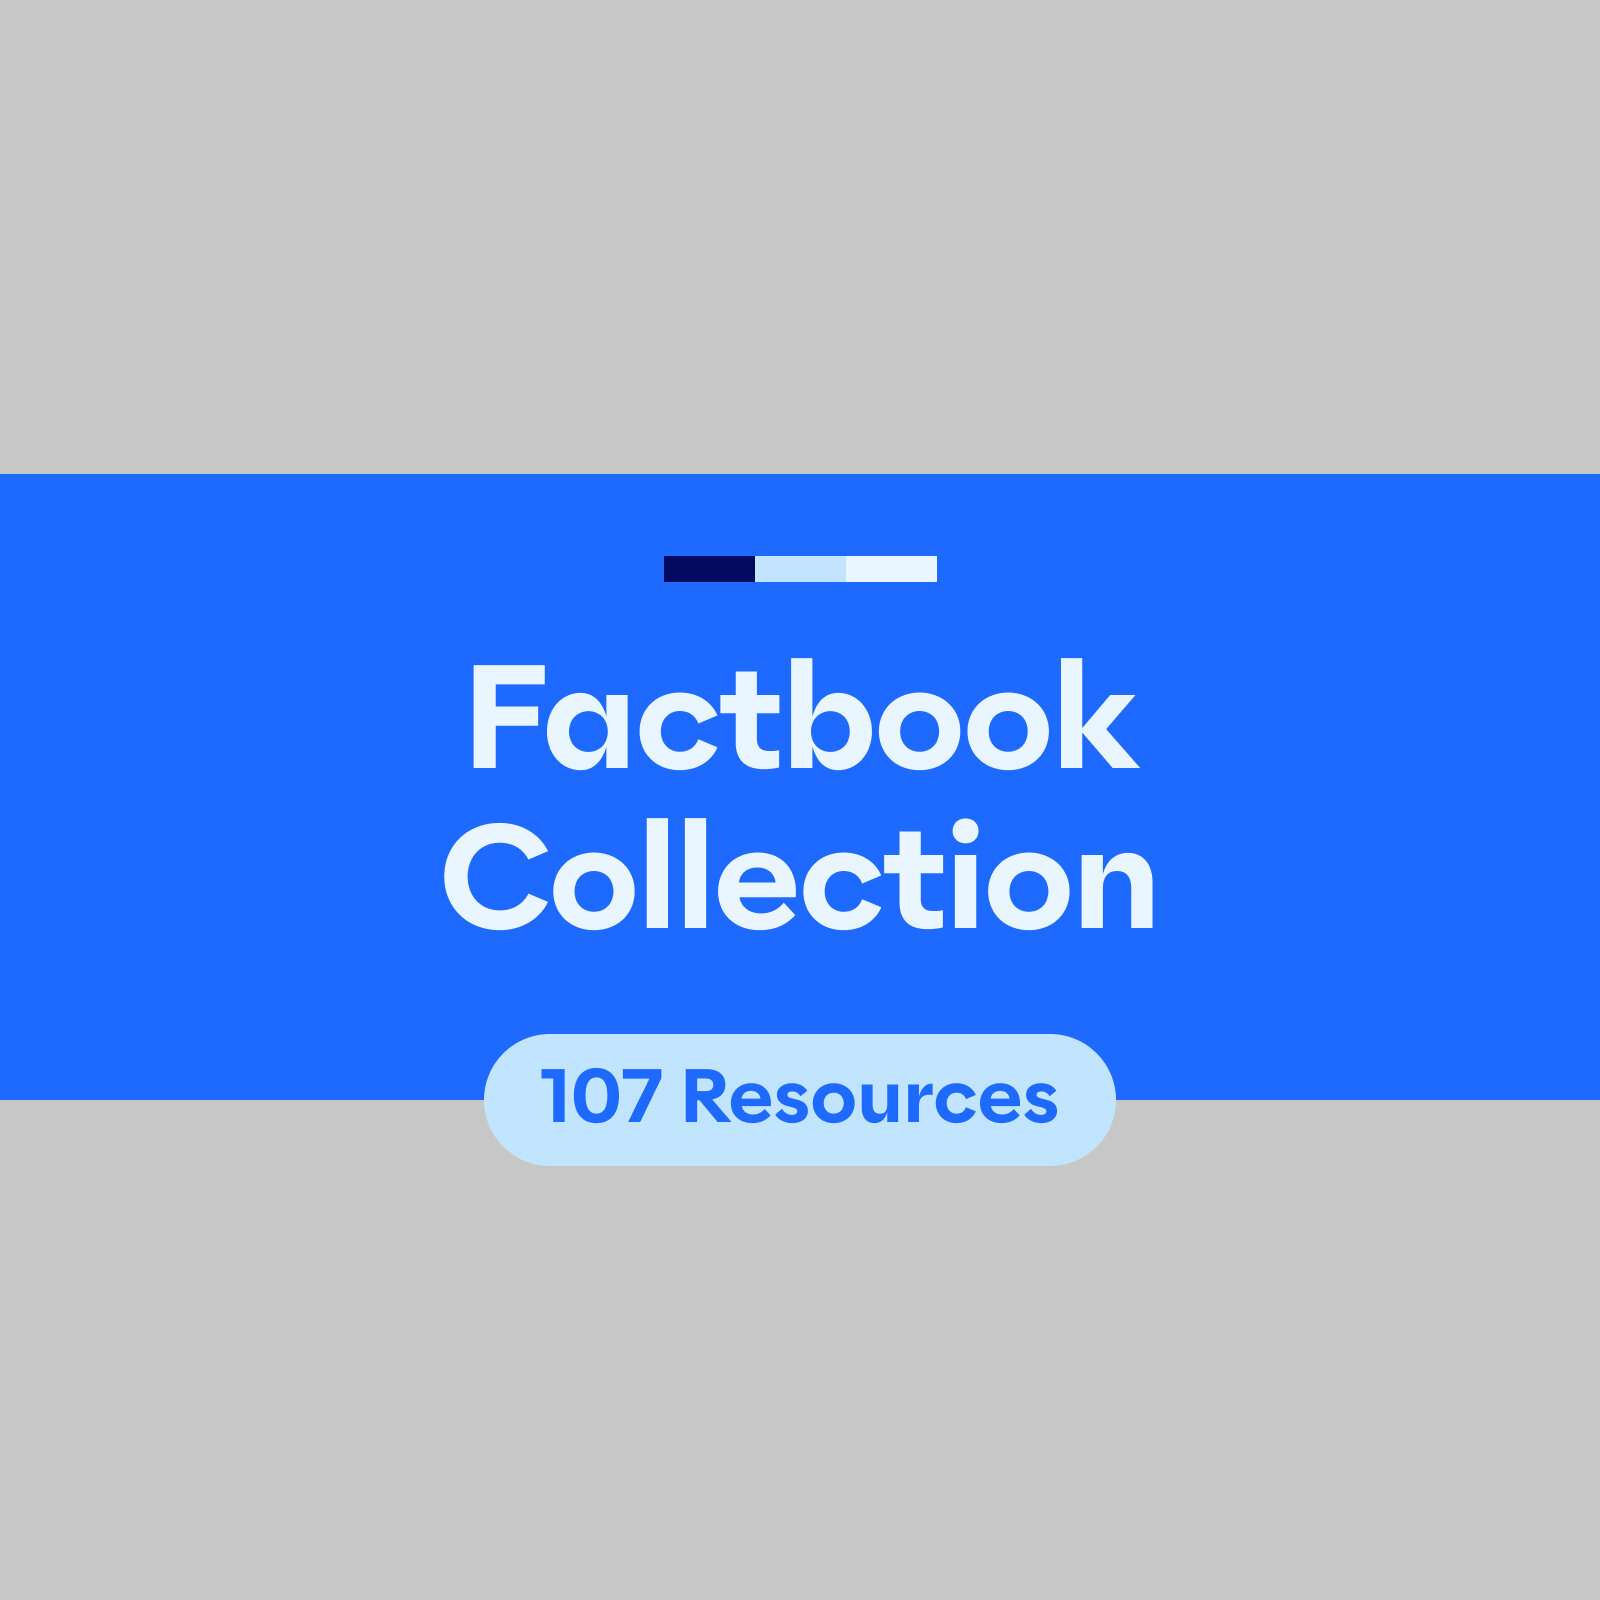 Factbook Feature Expansion Collection (107 Resources)